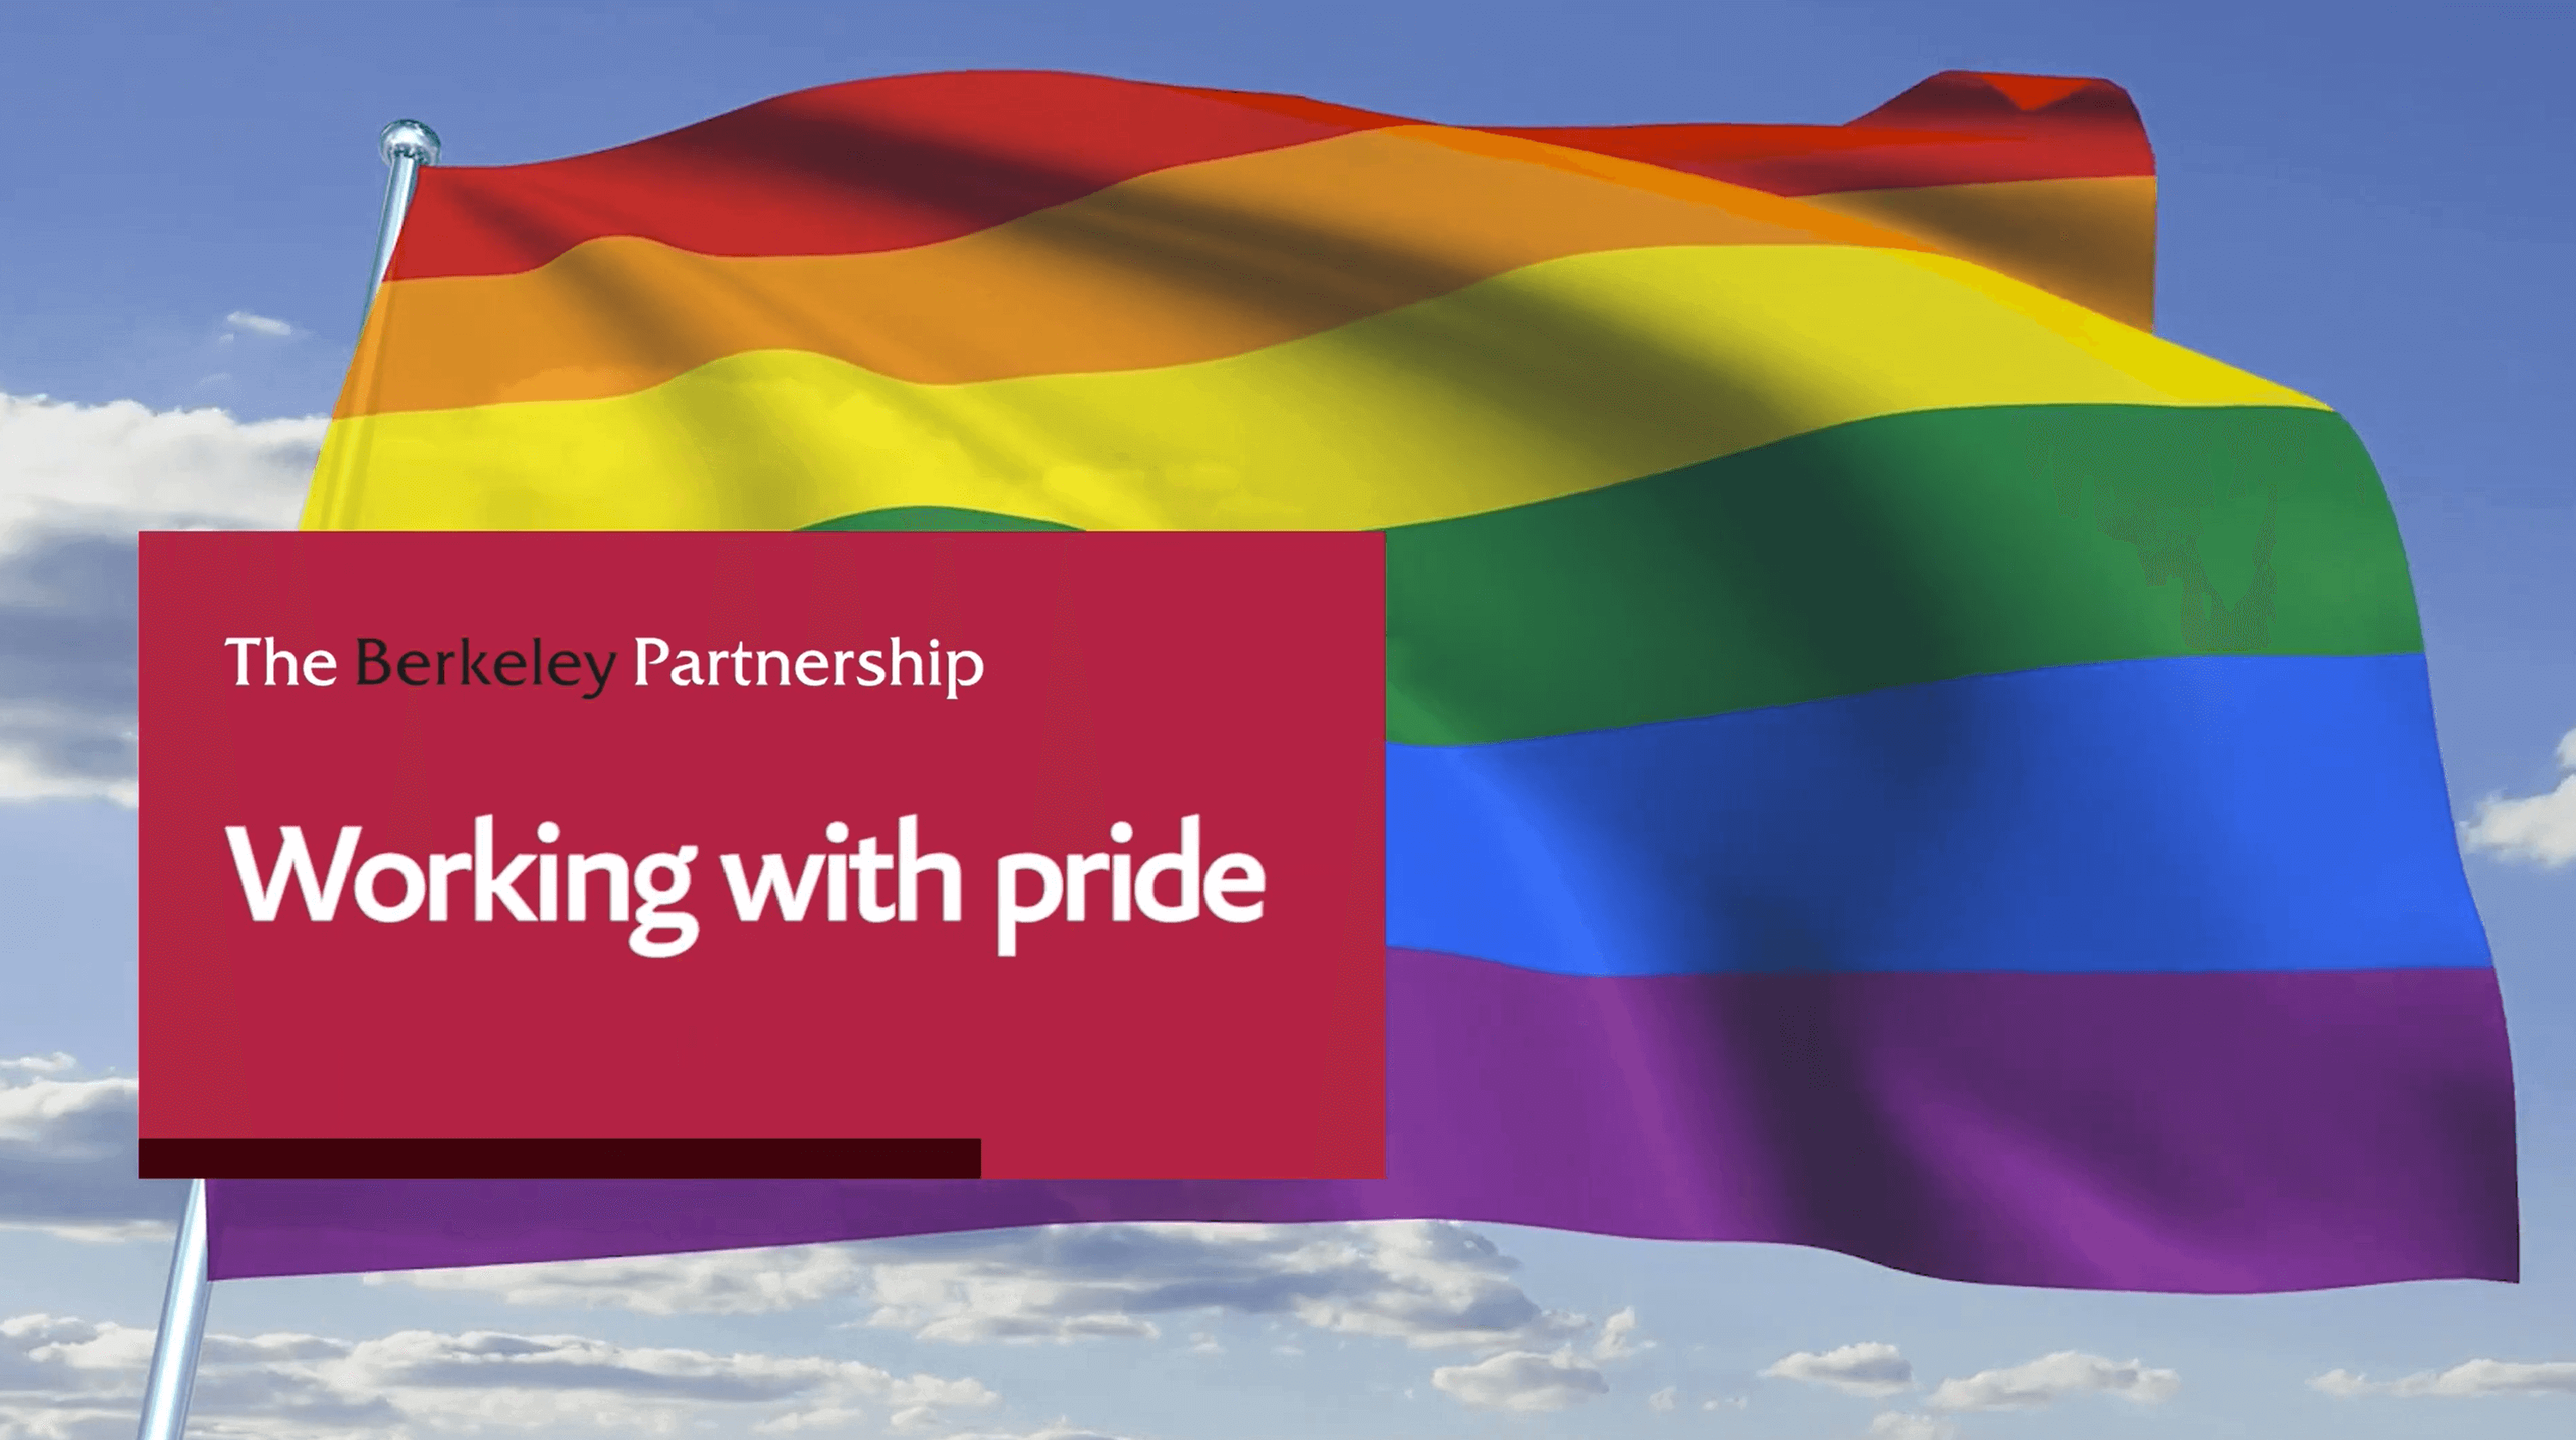 An on-screen banner says 'Working with pride'. In the background, an LGBT rainbow flag is flying.